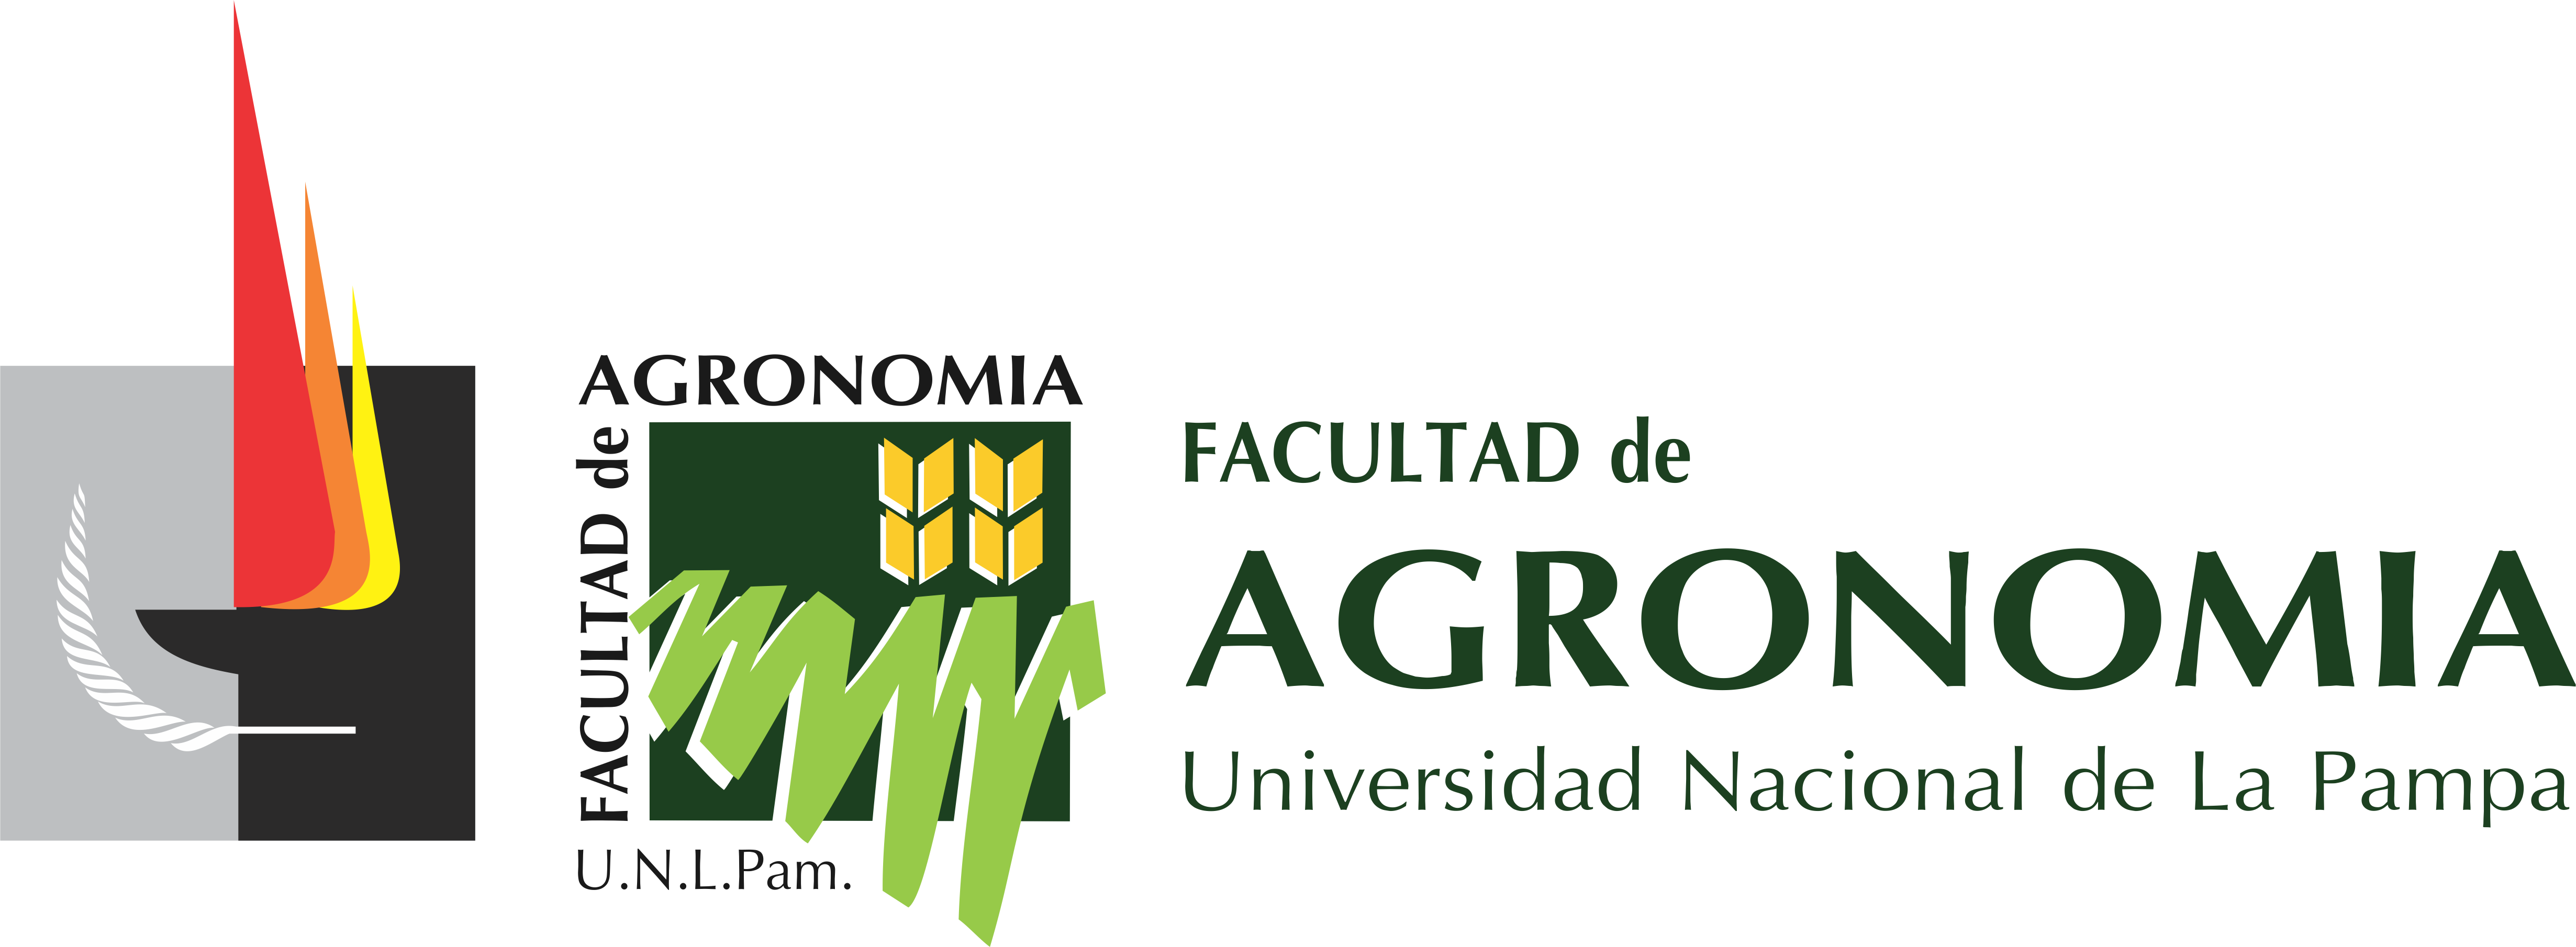 agro png 3 b9084